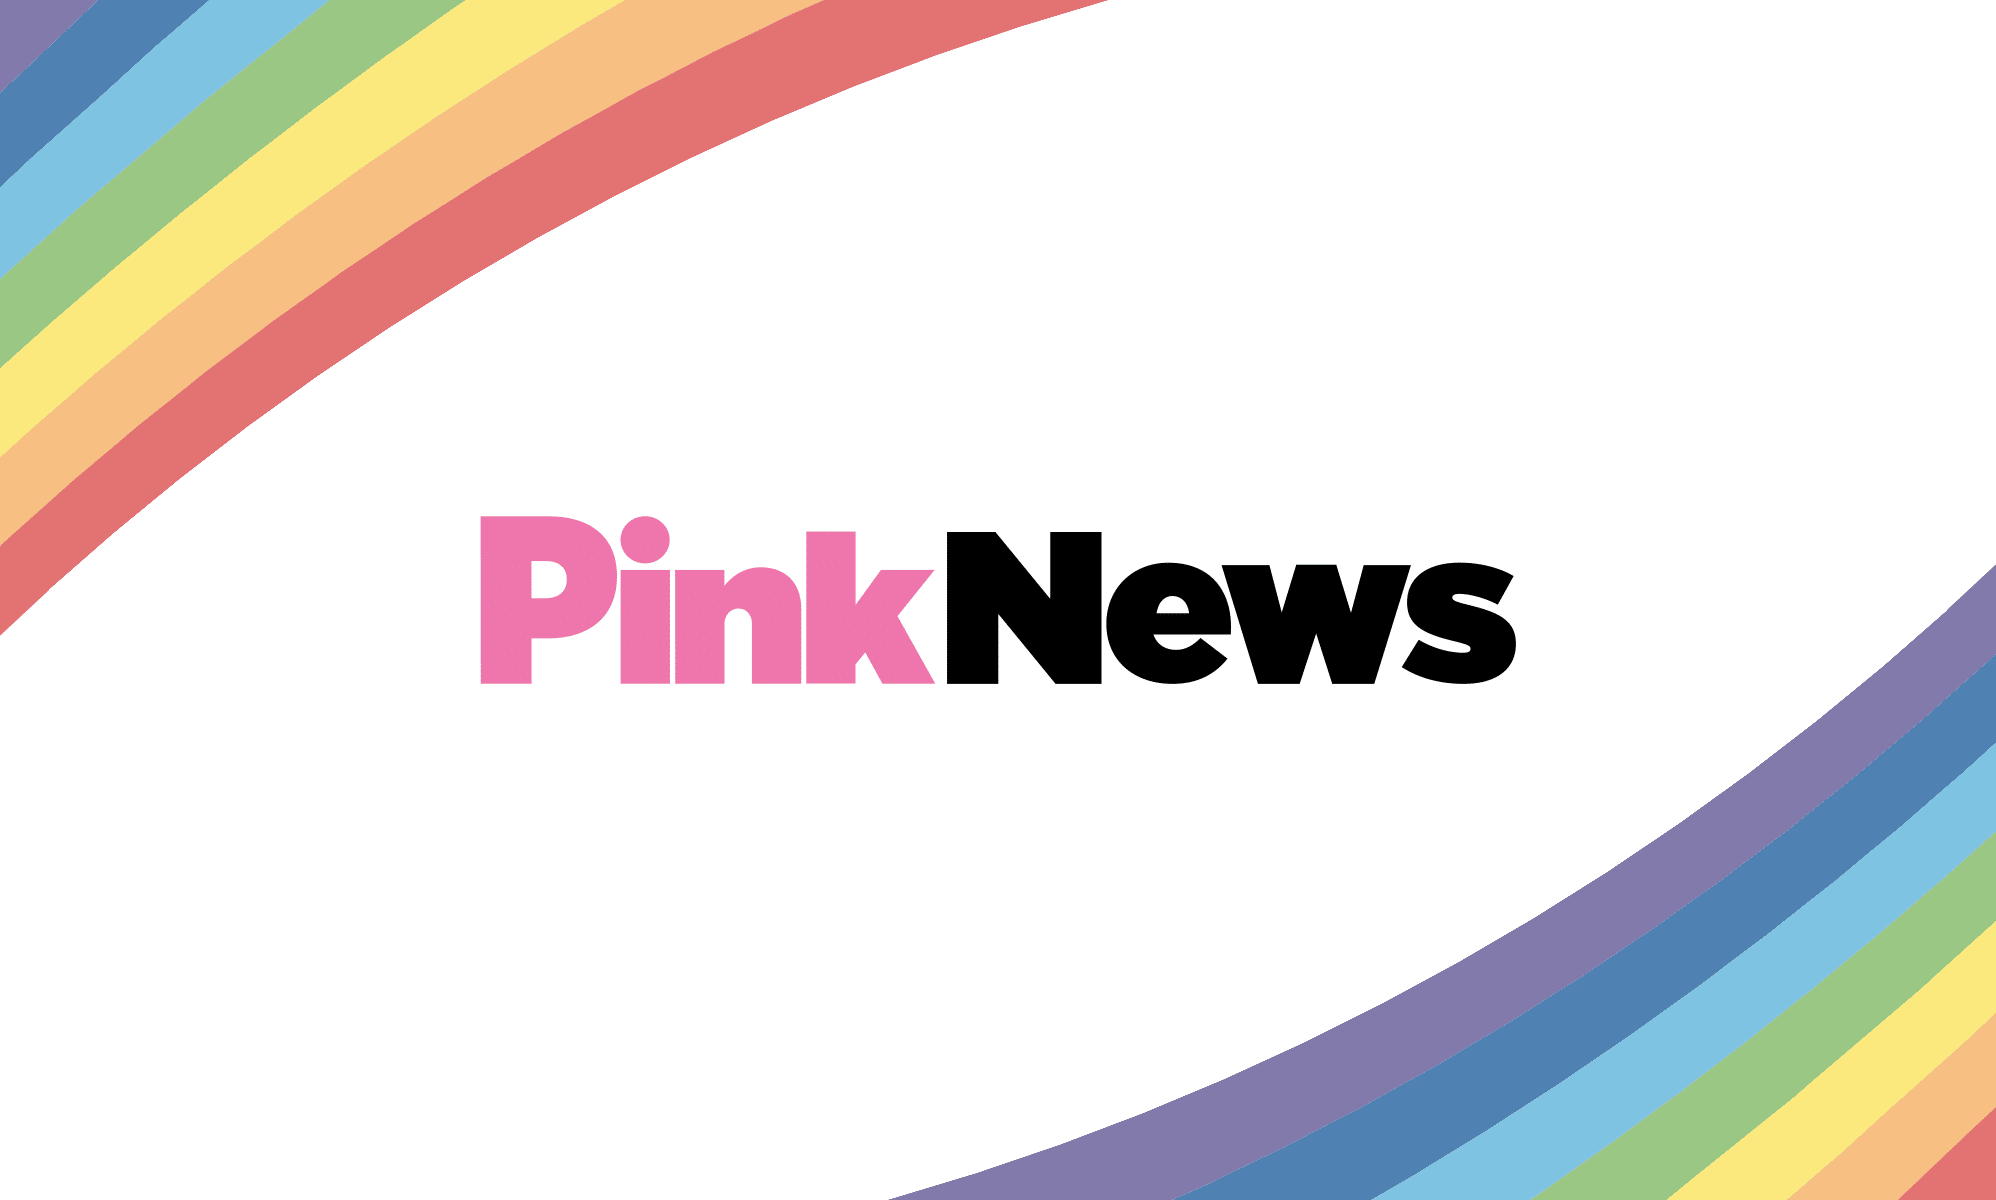 The top 10 PinkNews UK stories of 2014